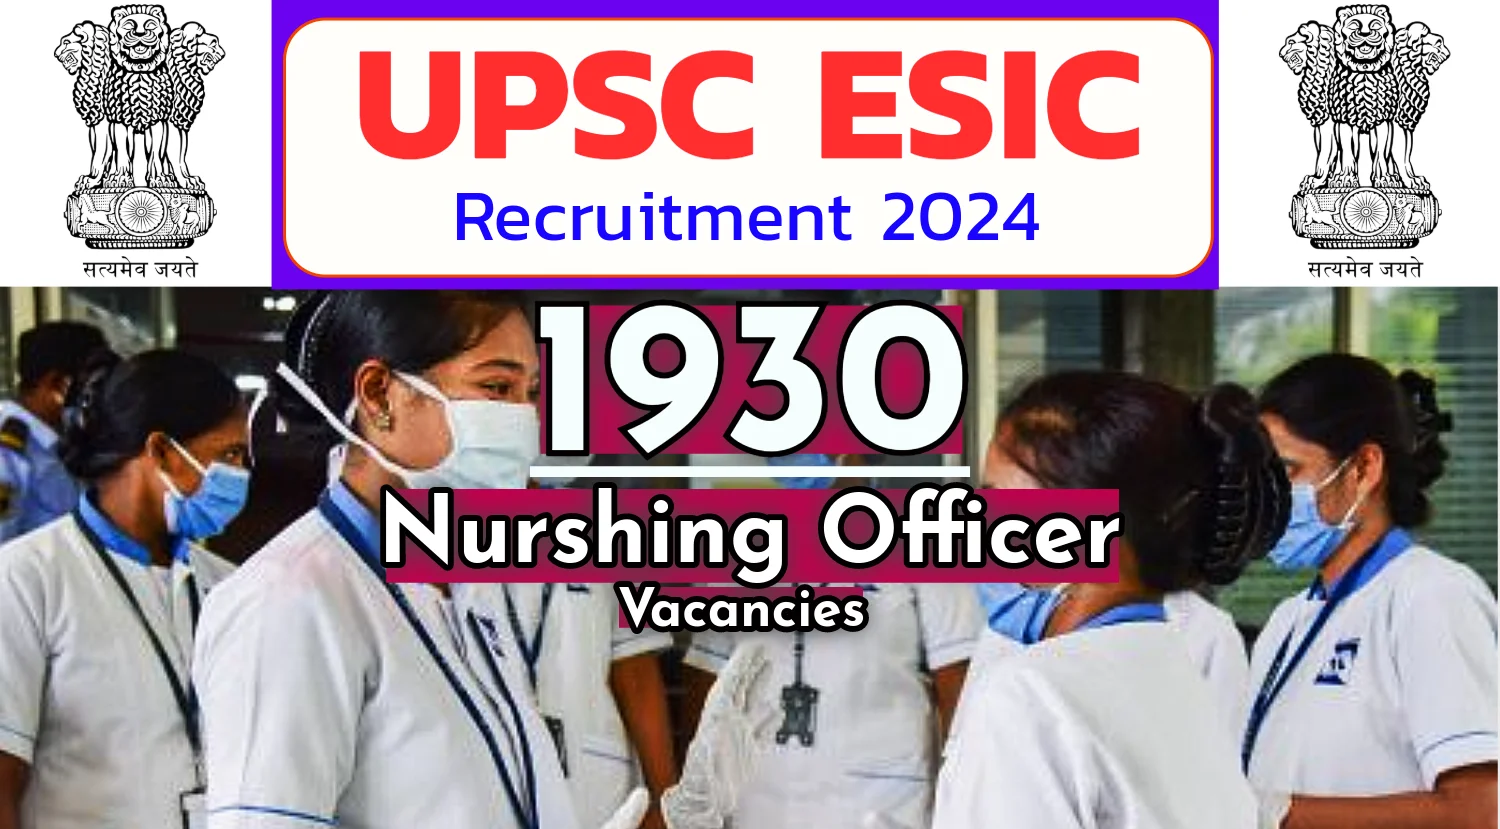 UPSC ESIC Nursing Officer Recruitment Notification for 1930 Vacancies Out